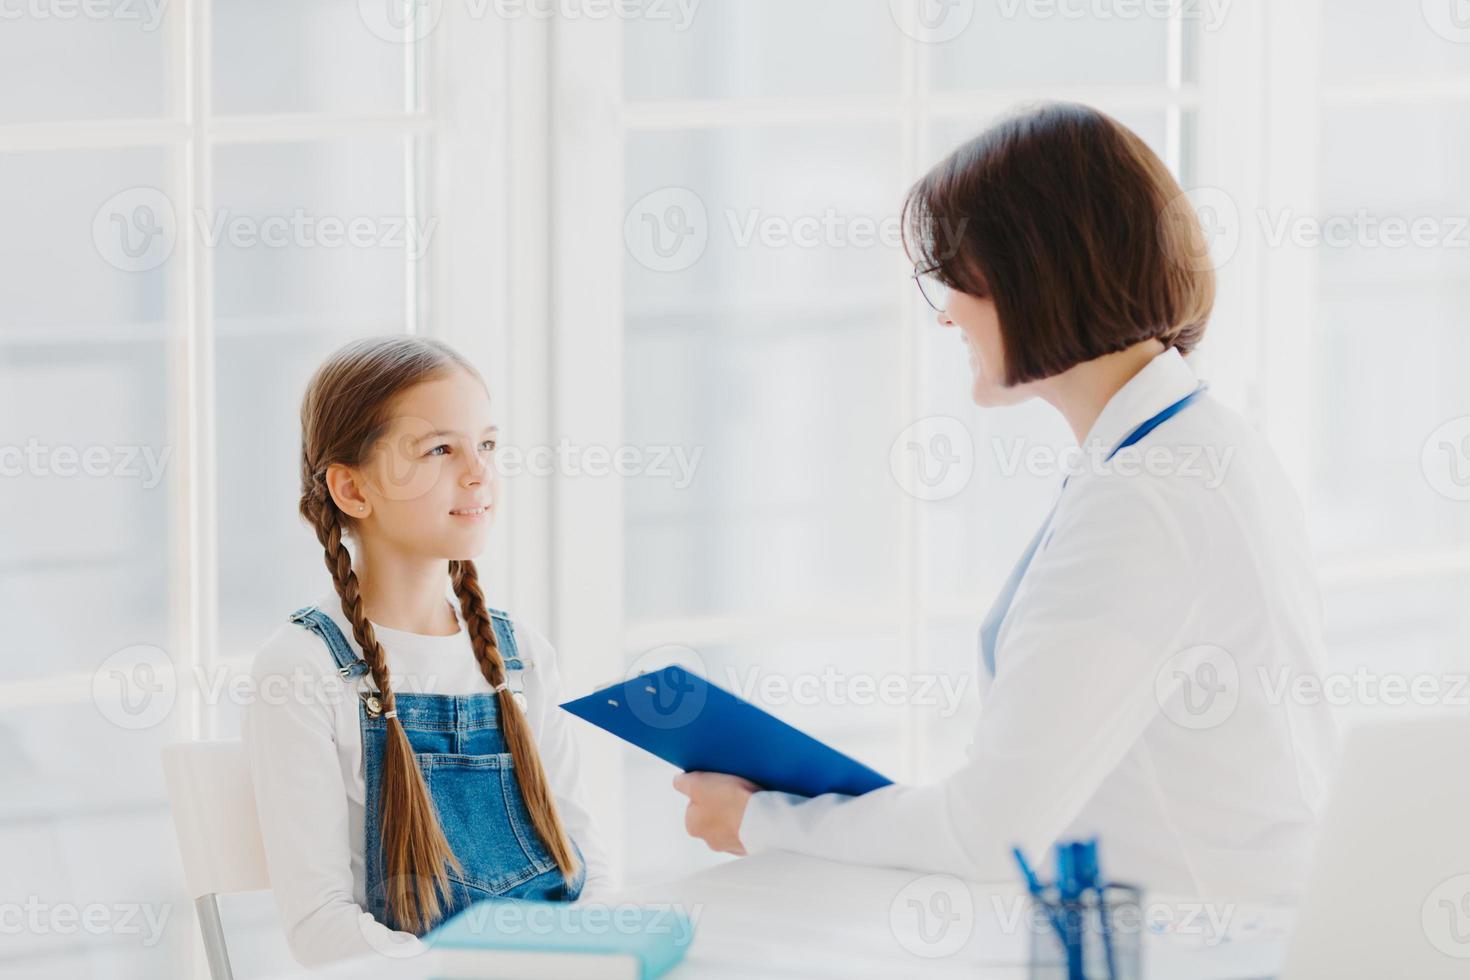 Female pediatrician examines little child, listens carefully to small kid patient, writes down notes in clipboard, pose in clinic or hospital against white window. Children healthcare concept photo